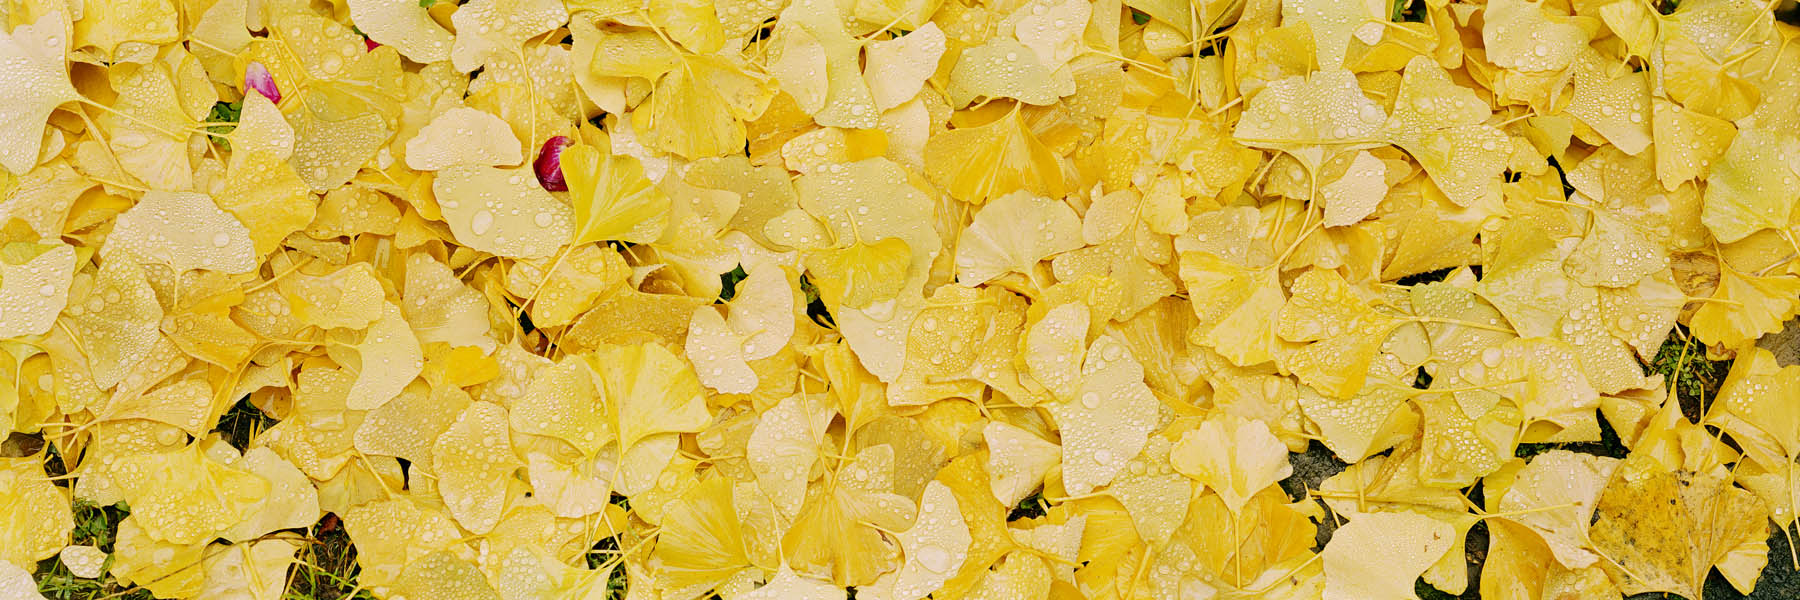 Water, water, ice, landscape, landscape, vision, view, large format photography, large format photography, large format photography, photography, photography, photography, white, white, blue, blue, green, green, 6x17, yellow, yellow, gingko, fall leaves, leaves, foliage